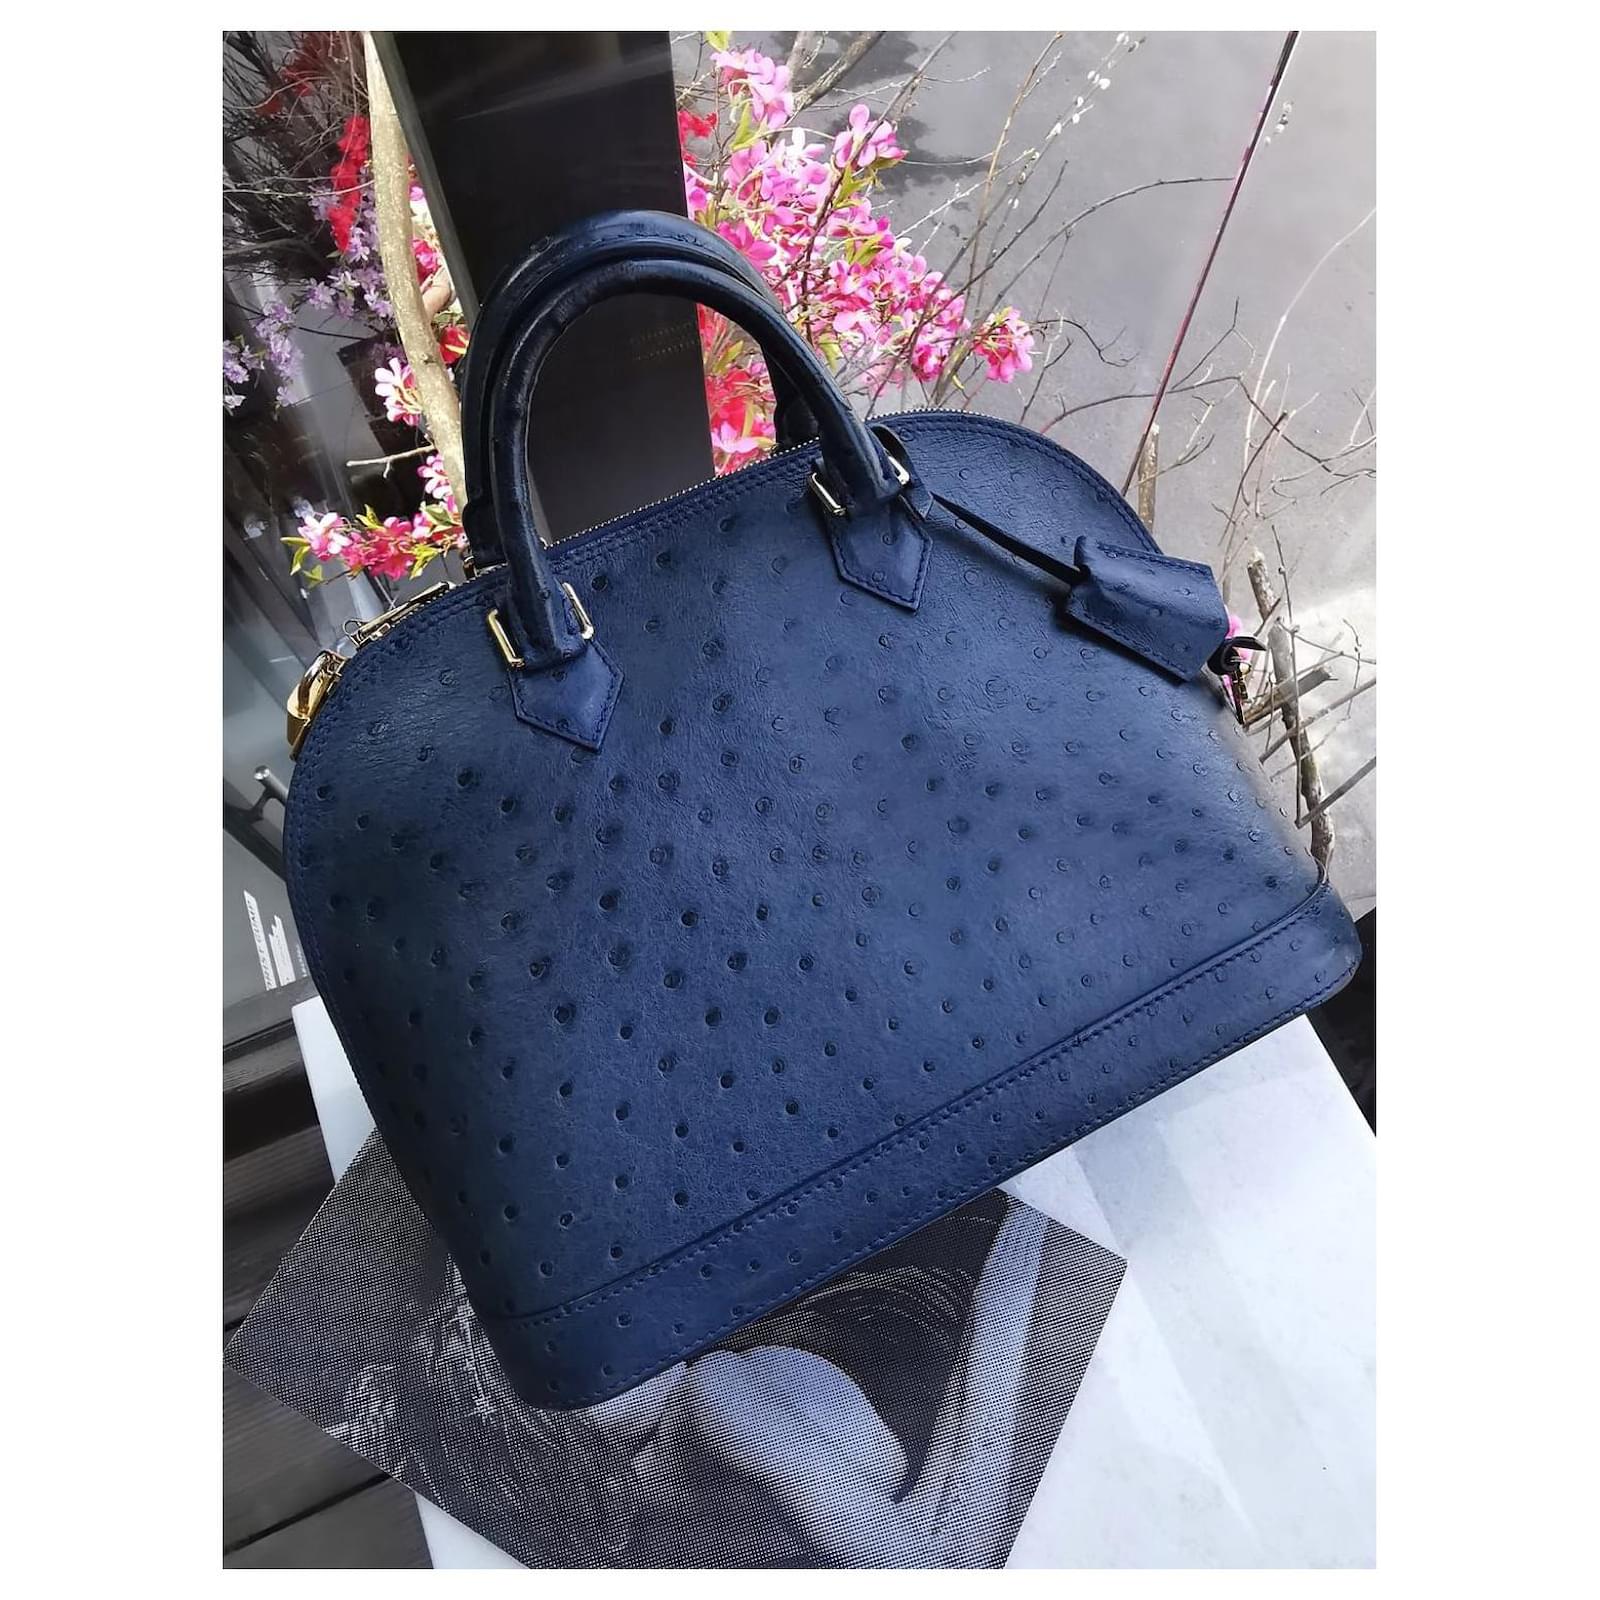 lv bag with blue strap